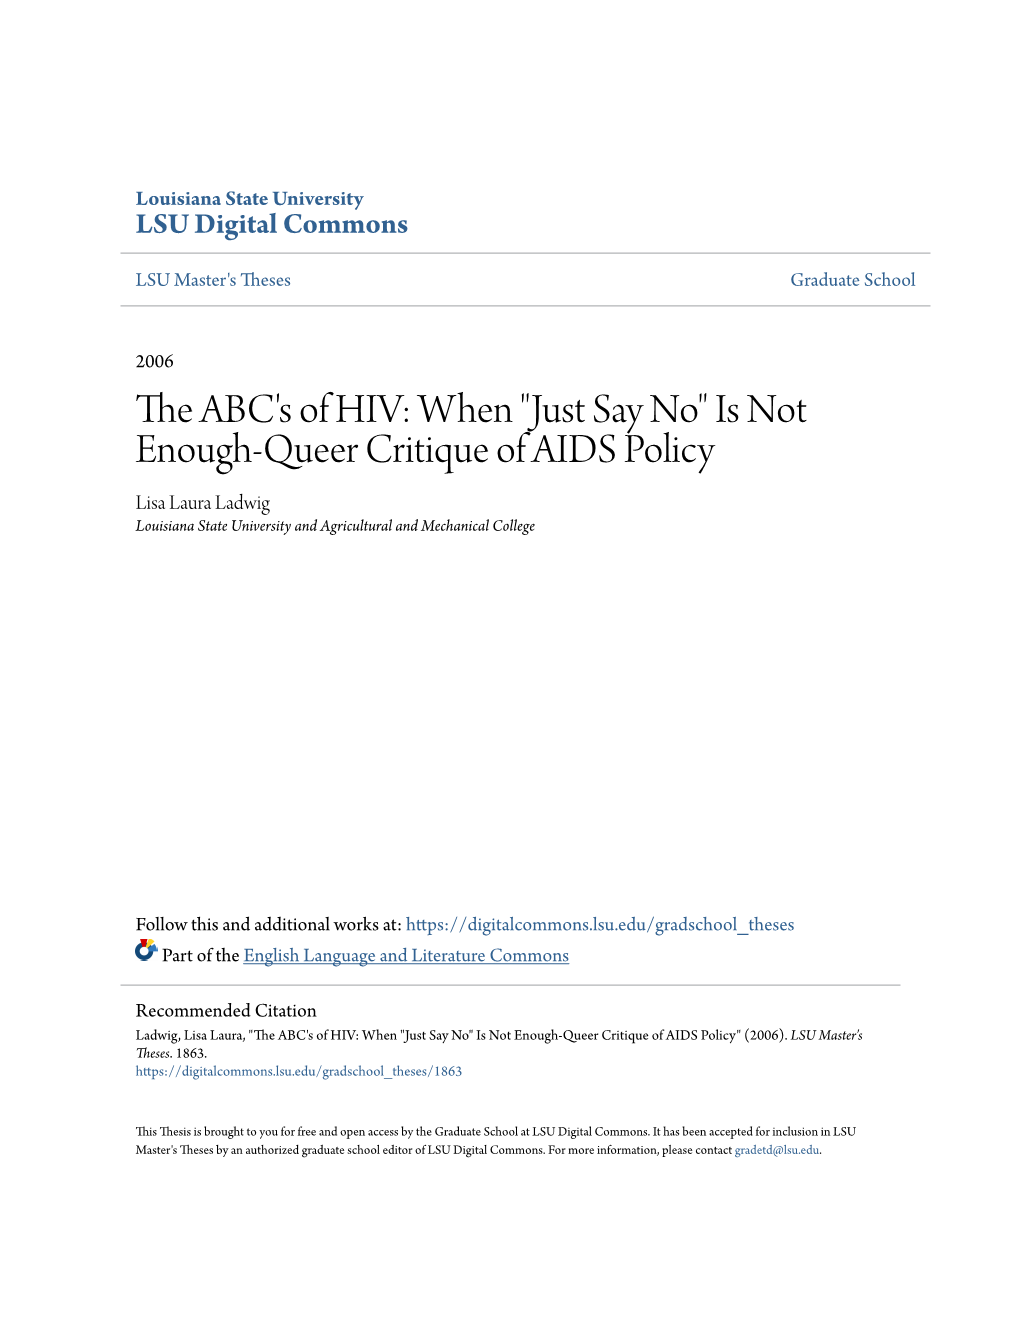 The ABC's of HIV: When "Just Say No" Is Not Enough-Queer Critique of AIDS Policy Lisa Laura Ladwig Louisiana State University and Agricultural and Mechanical College